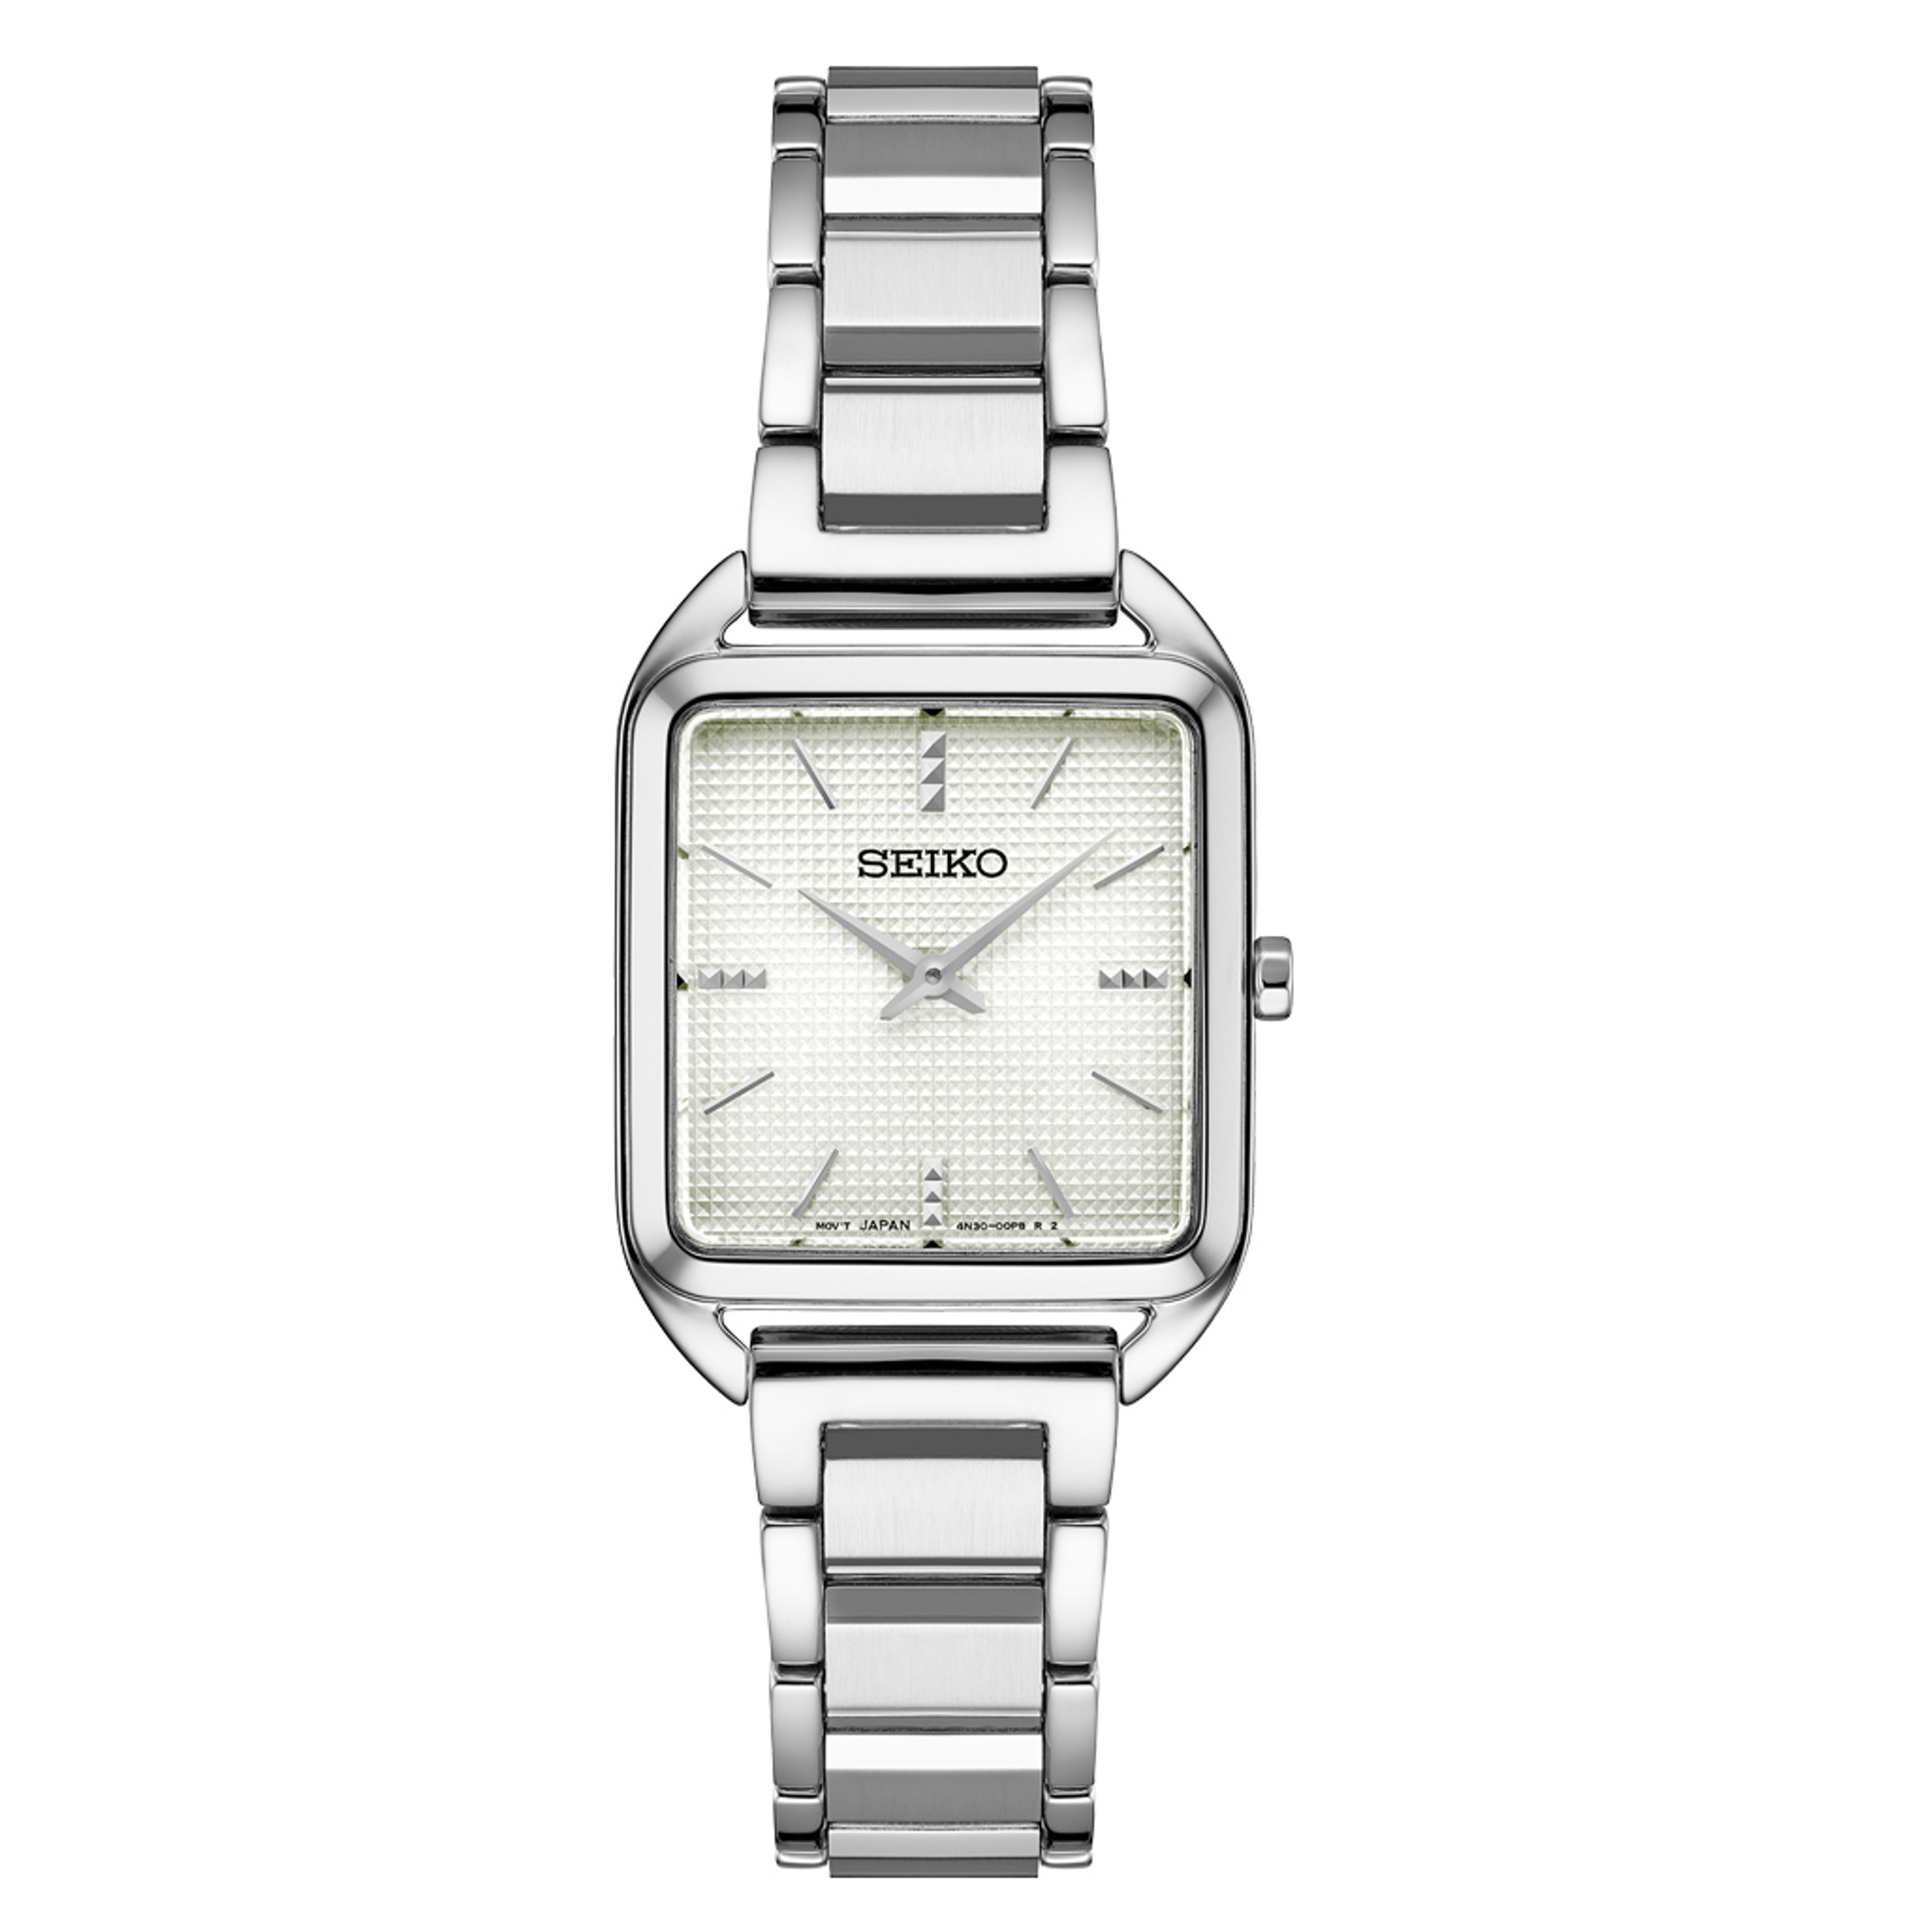 Seiko Essentials Tank Watch with White Grid Pattern Dial #SWR073